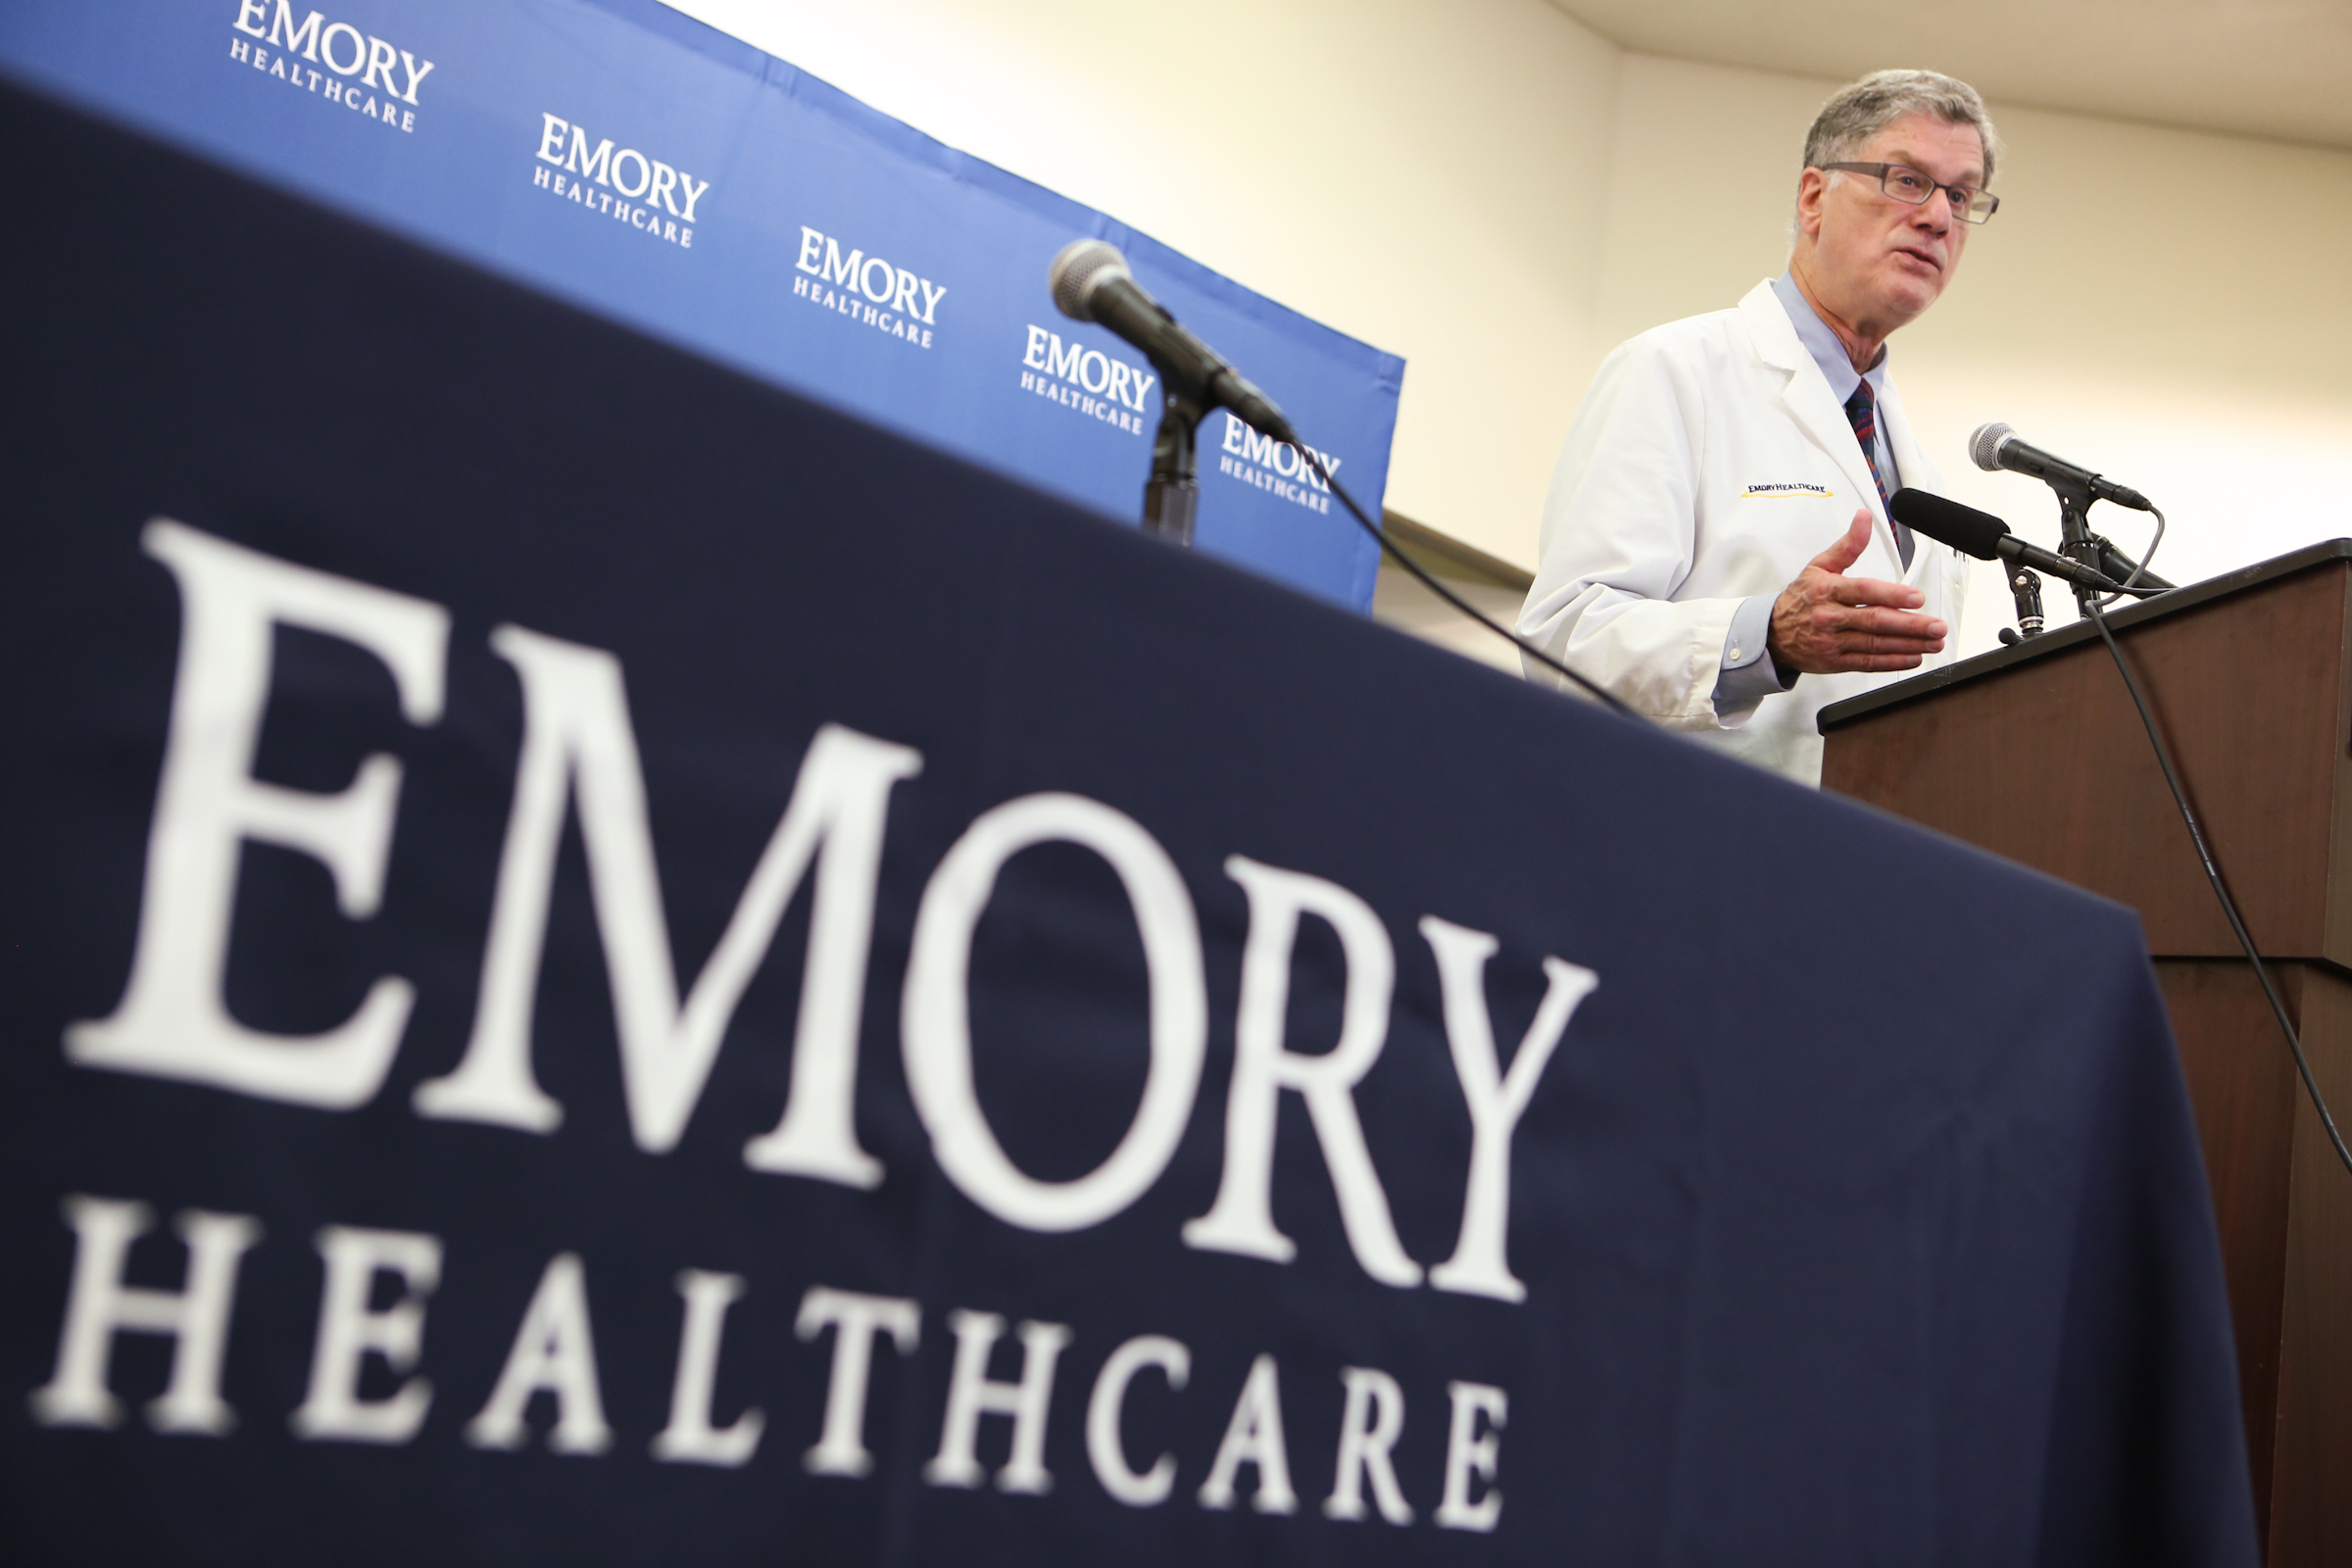 Dr. Bruce Ribner an epidemiologist and professor in the School of Medicine's Infectious Diseases Division, confirms that Emory University Hospital will be receiving and treating two American patients diagnosed with Ebola virus during a press conference at Emory University Hospital on Aug. 1, 2014 in Atlanta. (Jessica McGowan—Getty Images)